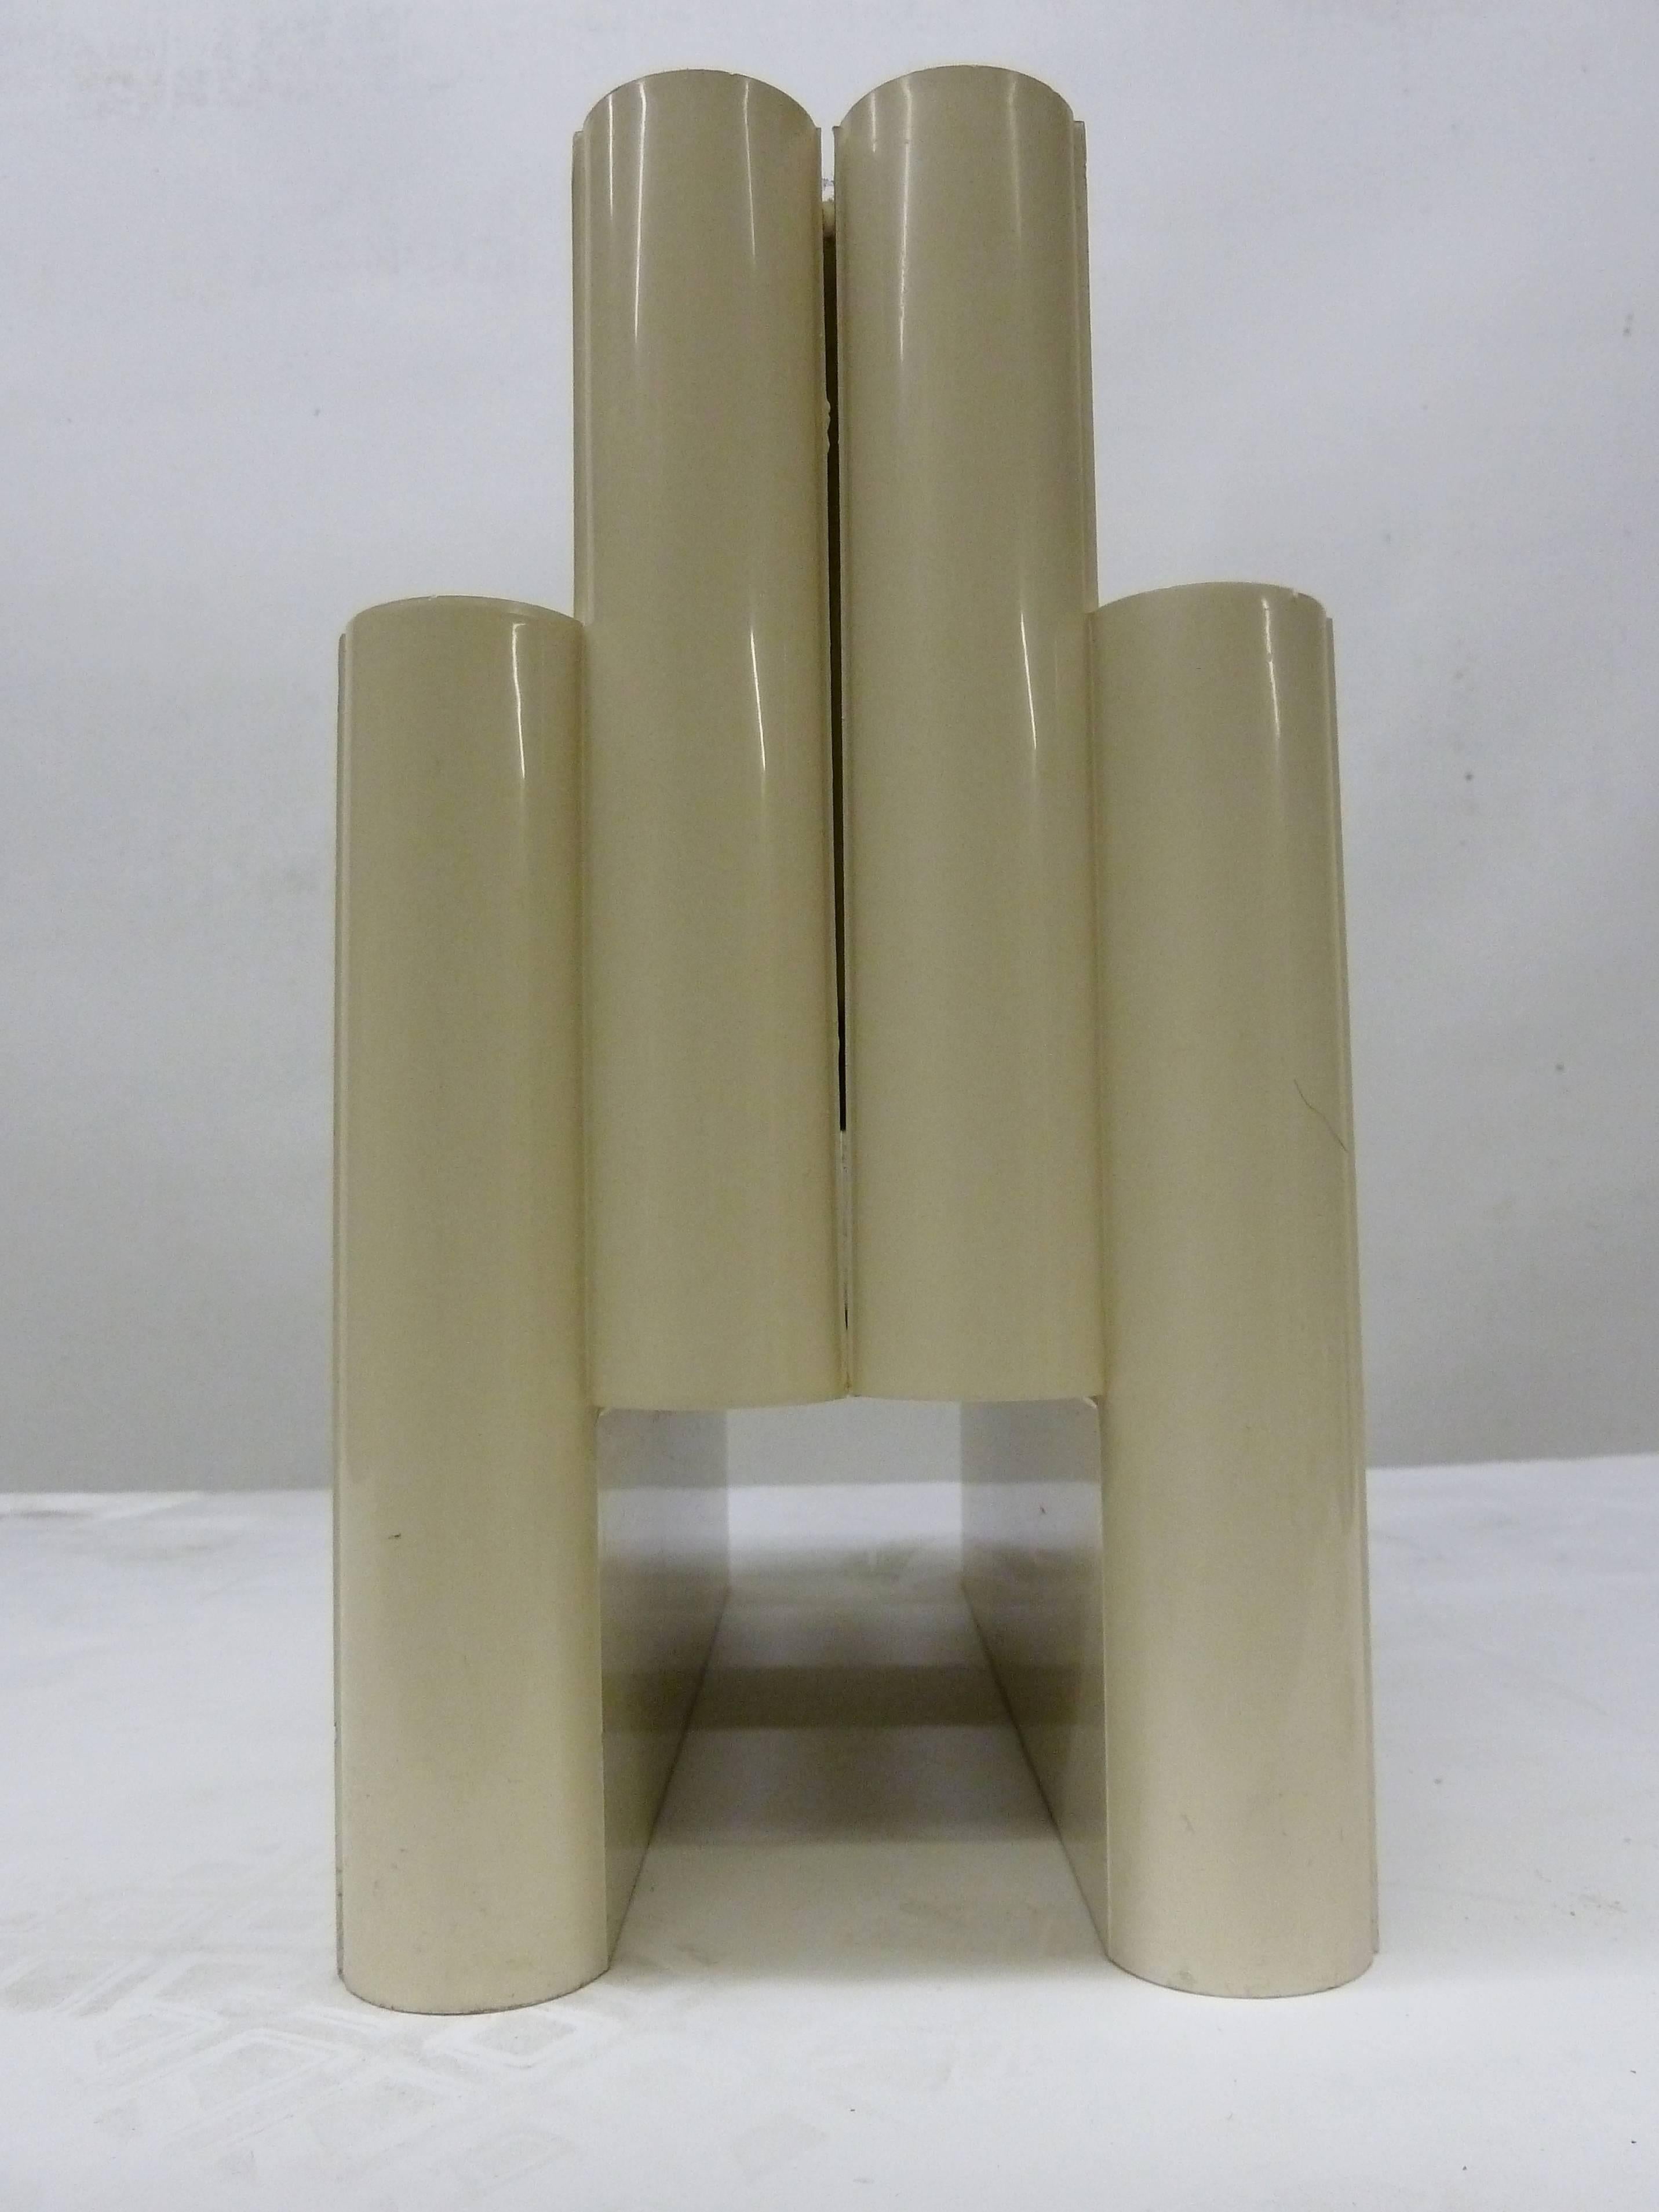 Beige plastic magazine or file holder has a distinct shape that seems to resemble an early 20th century skyscraper. Stamped on the bottom 
